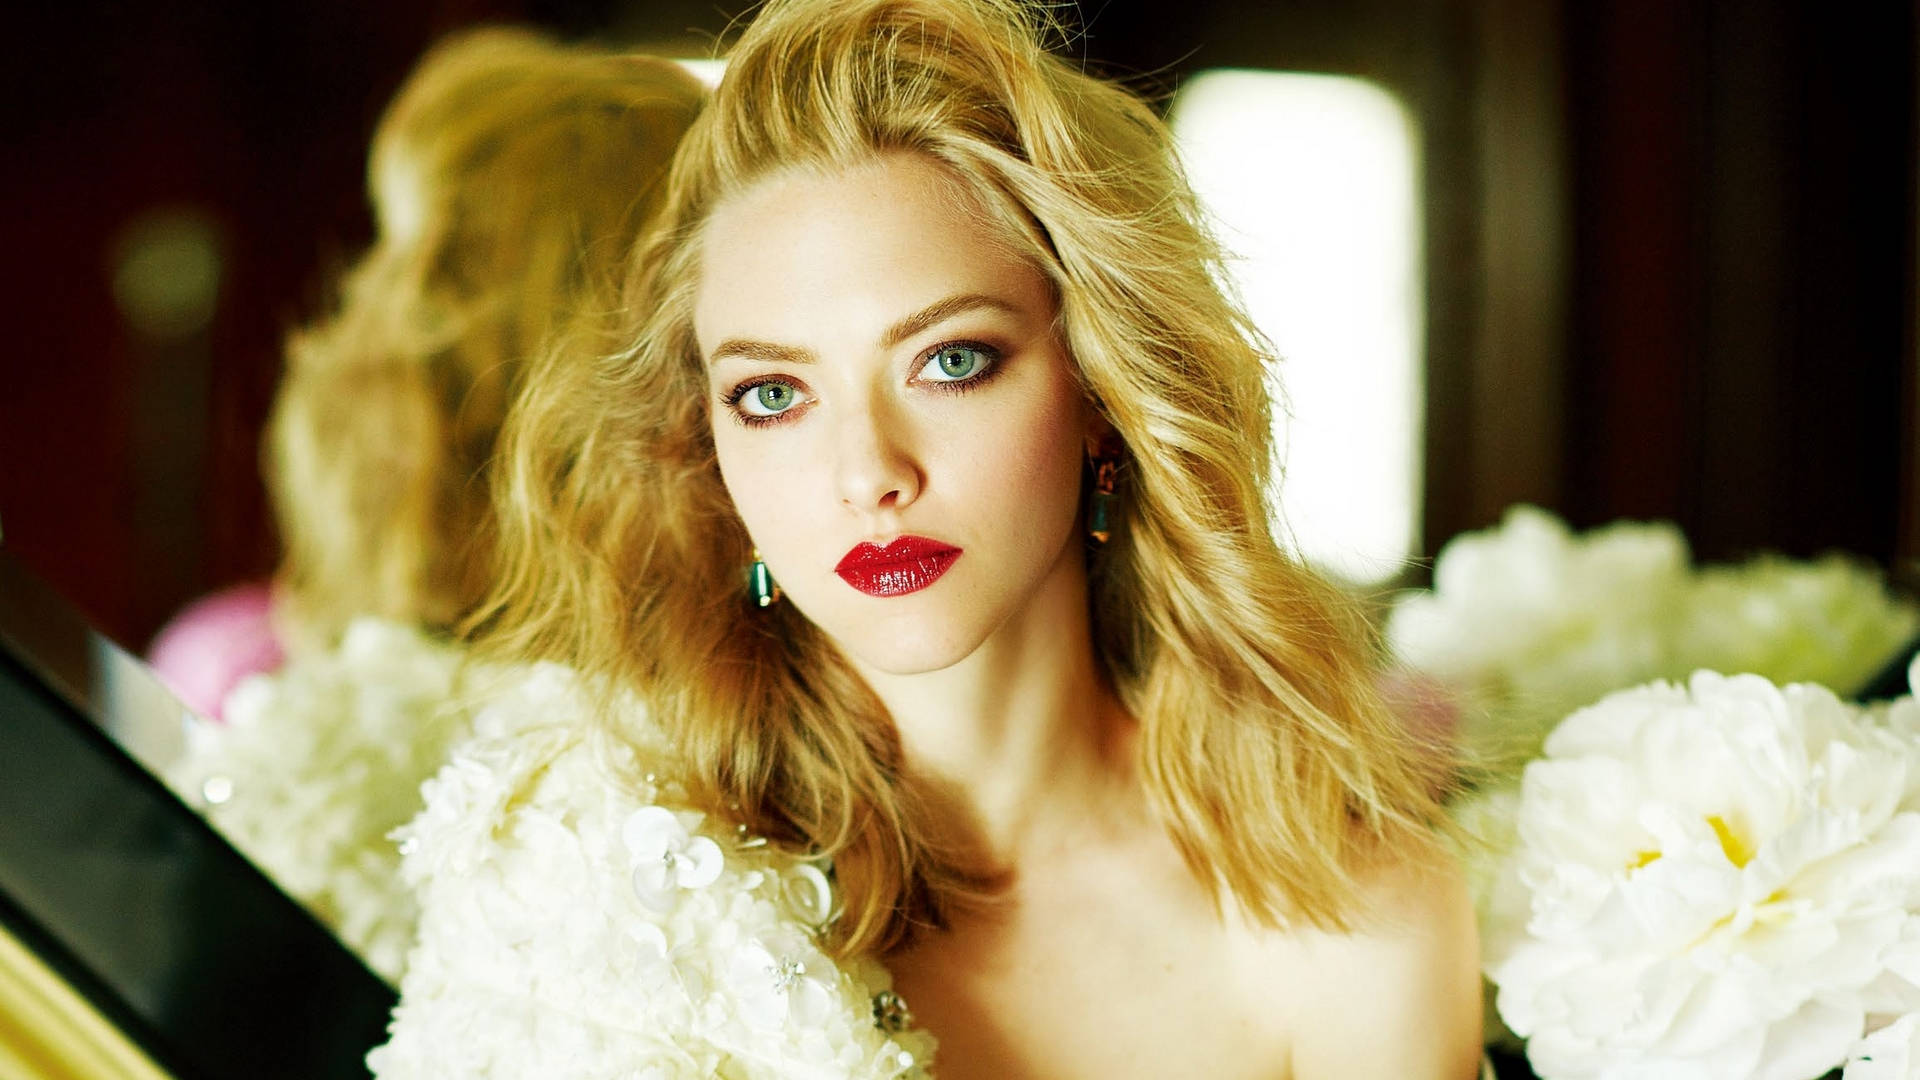 Beautiful Blonde Wearing Red Lipstick Picture